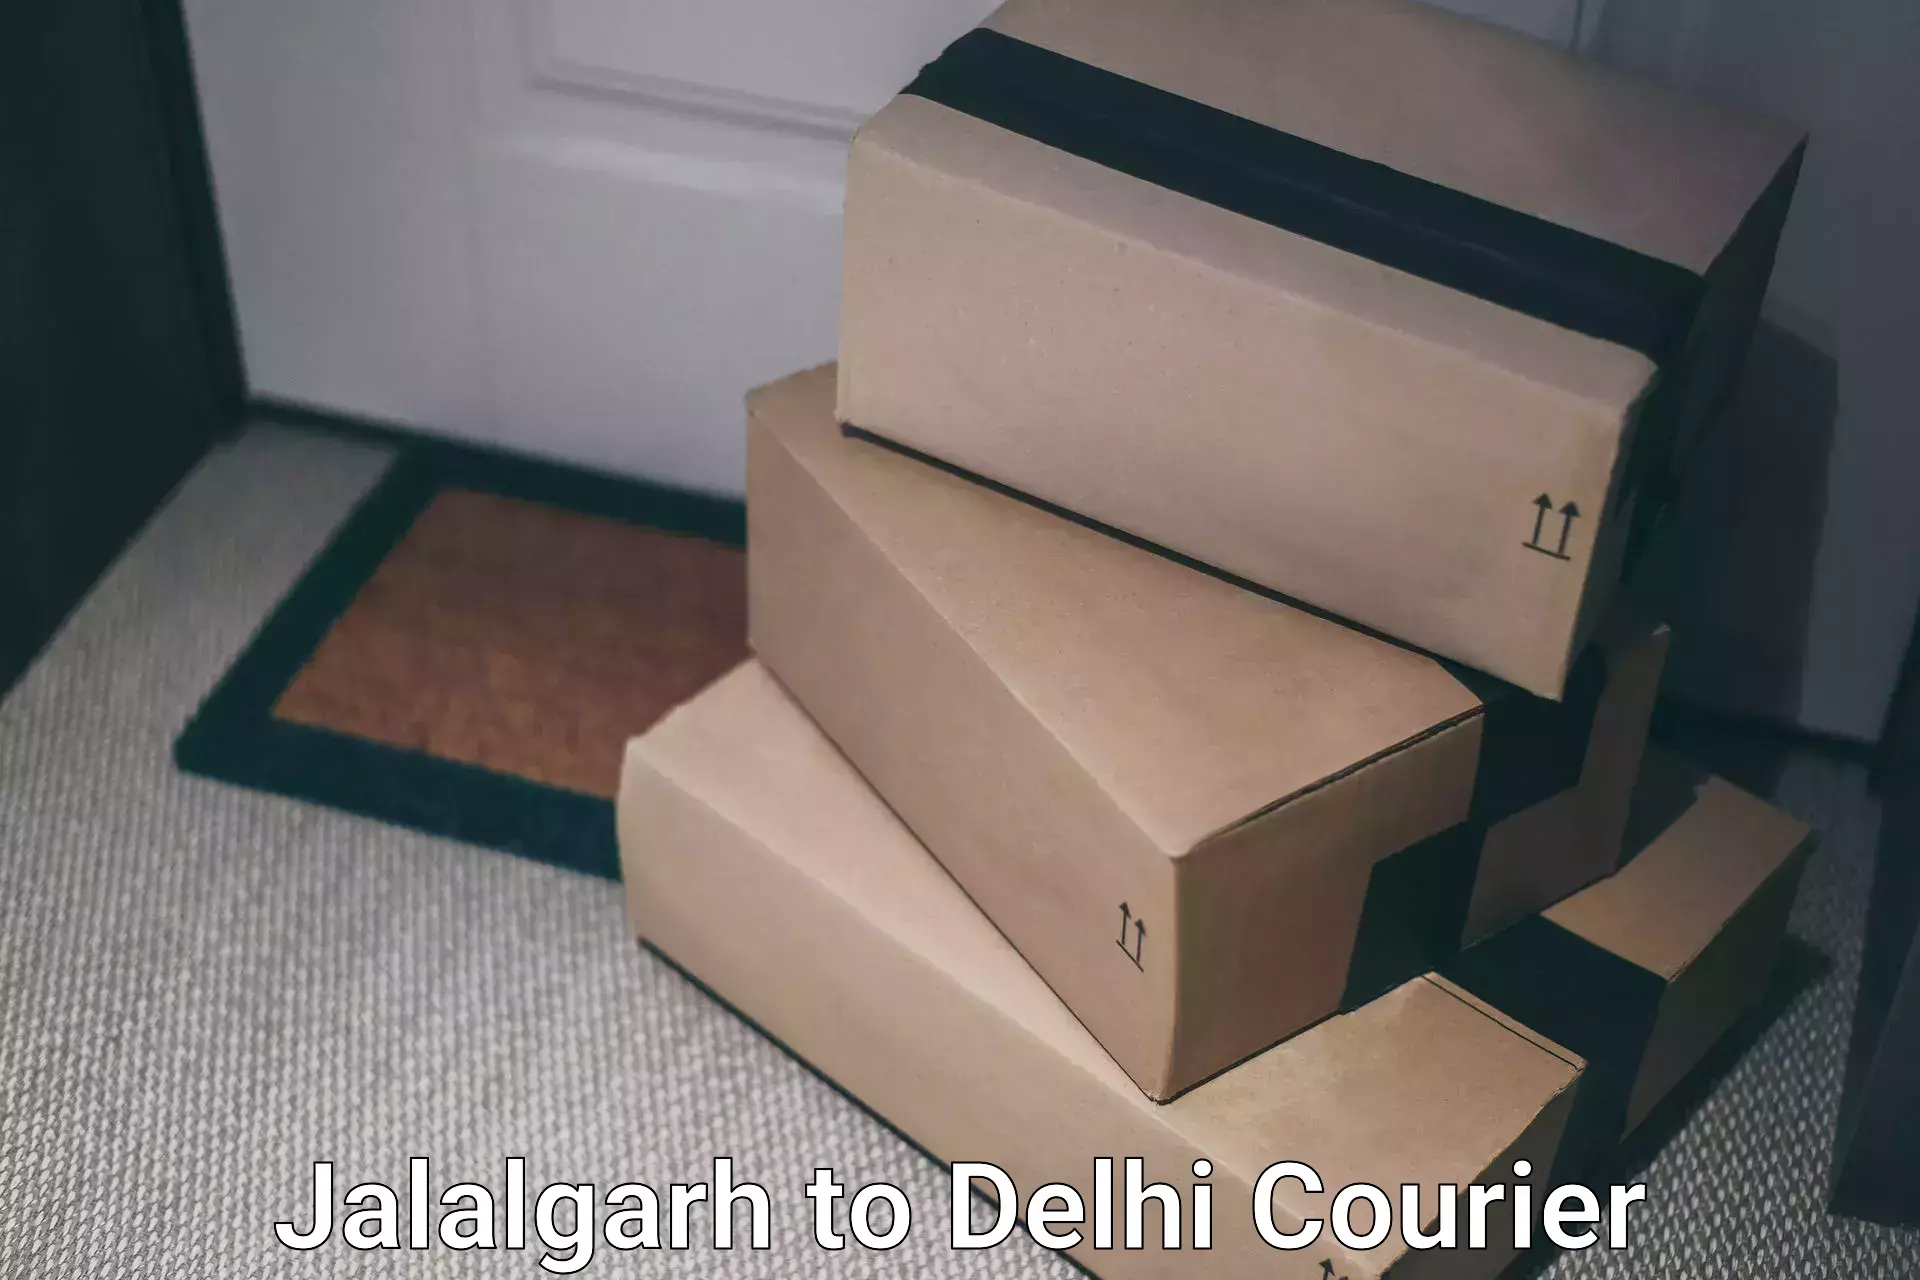 Global shipping networks Jalalgarh to NCR